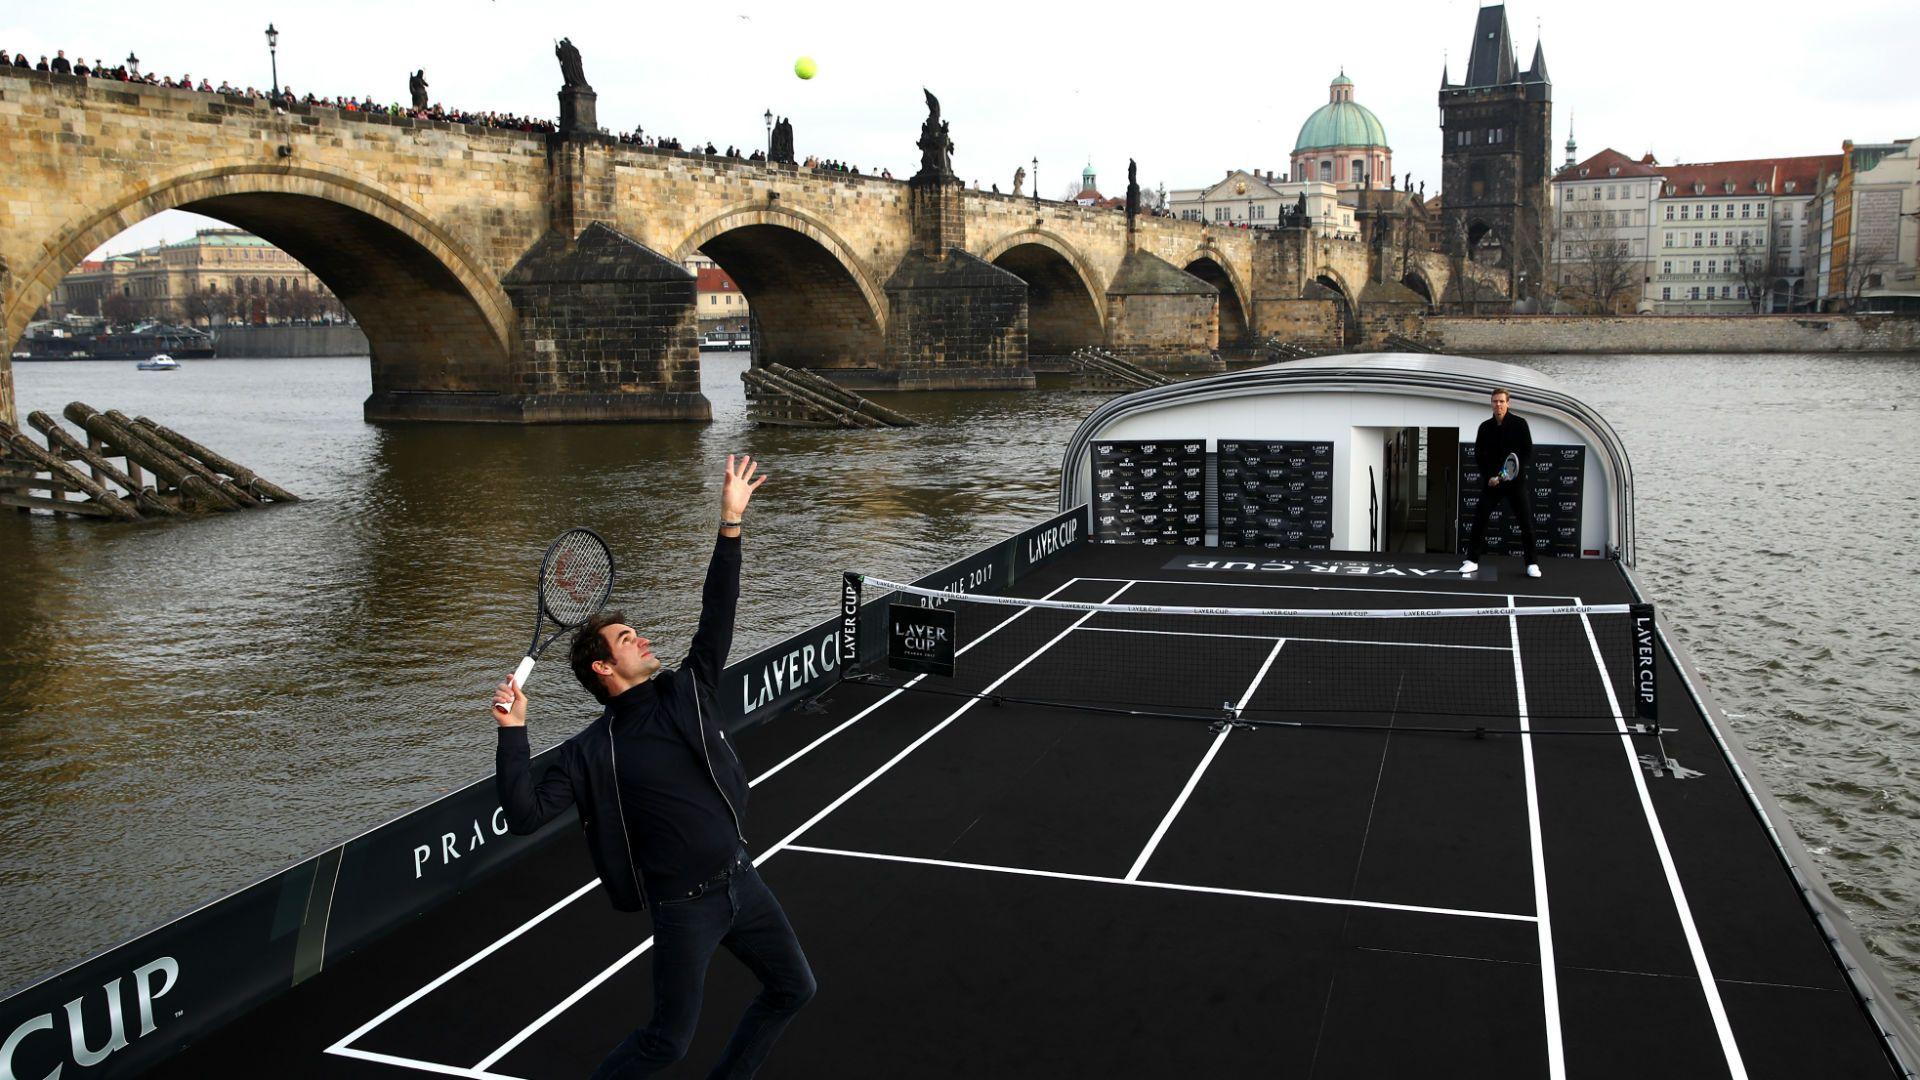 Roger Federer and Tomas Berdych battle it out on a boat in Prague